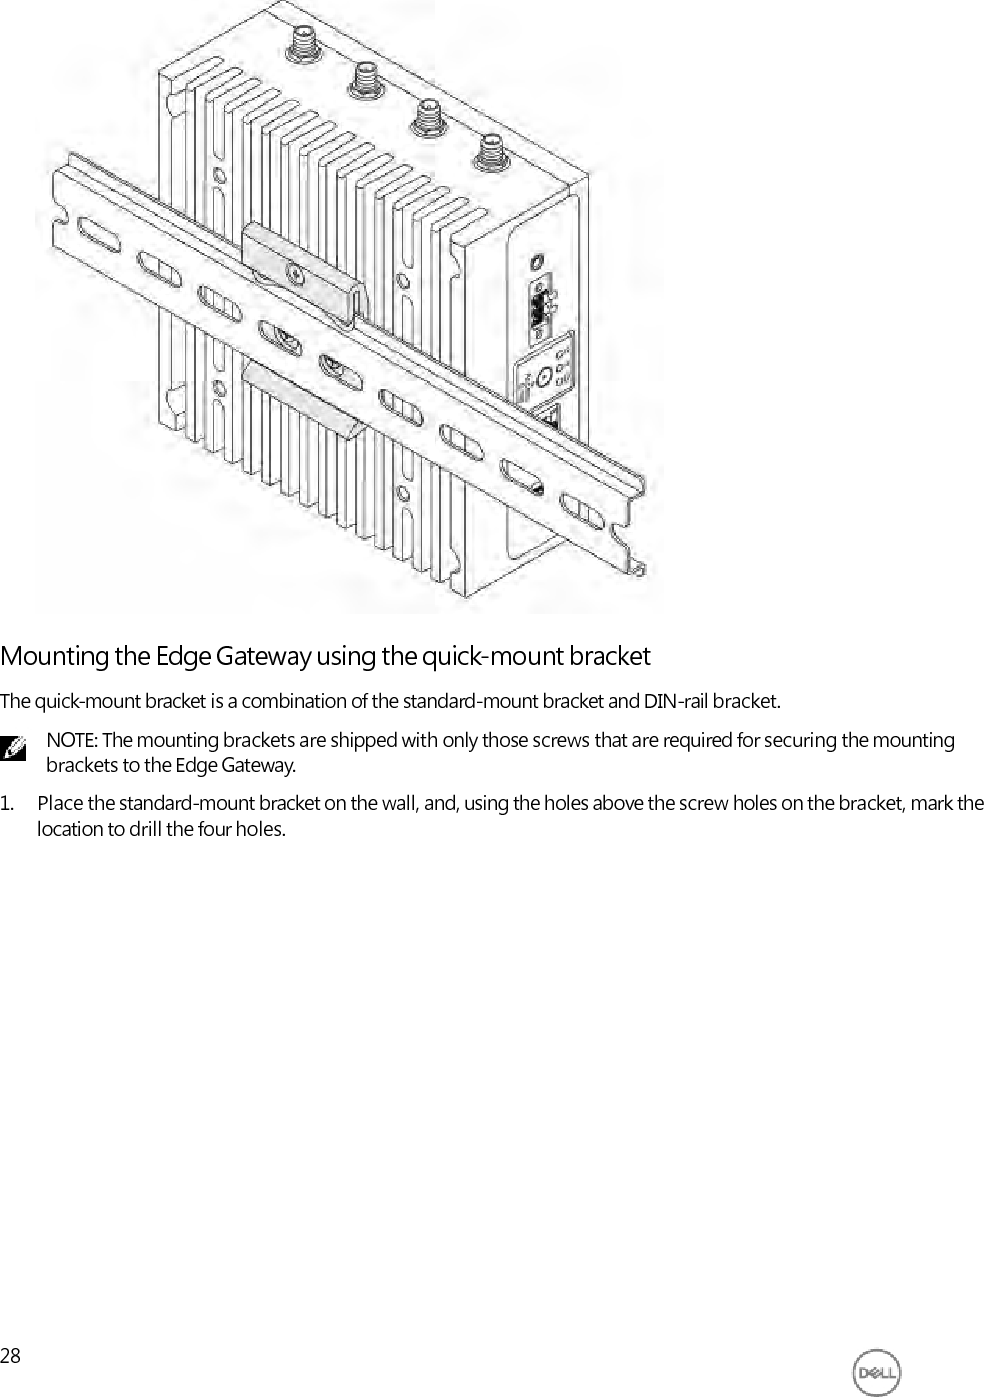                               Mounting the Edge Gateway using the quick-mount bracket The quick-mount bracket is a combination of the standard-mount bracket and DIN-rail bracket. NOTE: The mounting brackets are shipped with only those screws that are required for securing the mounting brackets to the Edge Gateway. 1. Place the standard-mount bracket on the wall, and, using the holes above the screw holes on the bracket, mark the location to drill the four holes.                     28